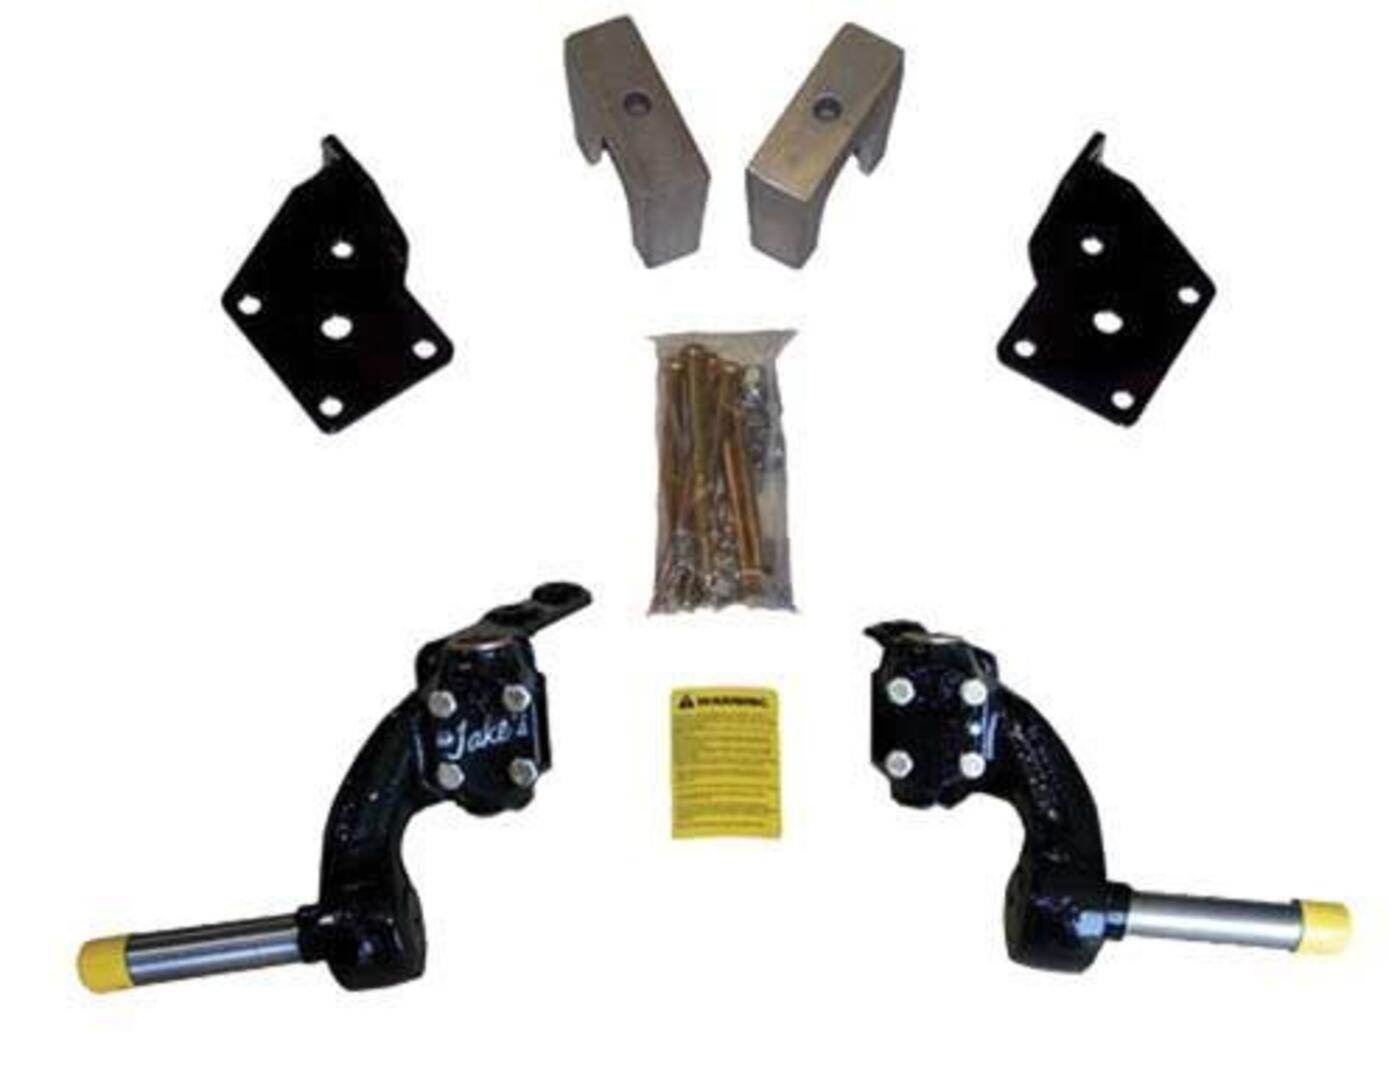 Jake's Fairplay Star & Zone Electric 3 Spindle Lift Kit (Years 2005-Up)